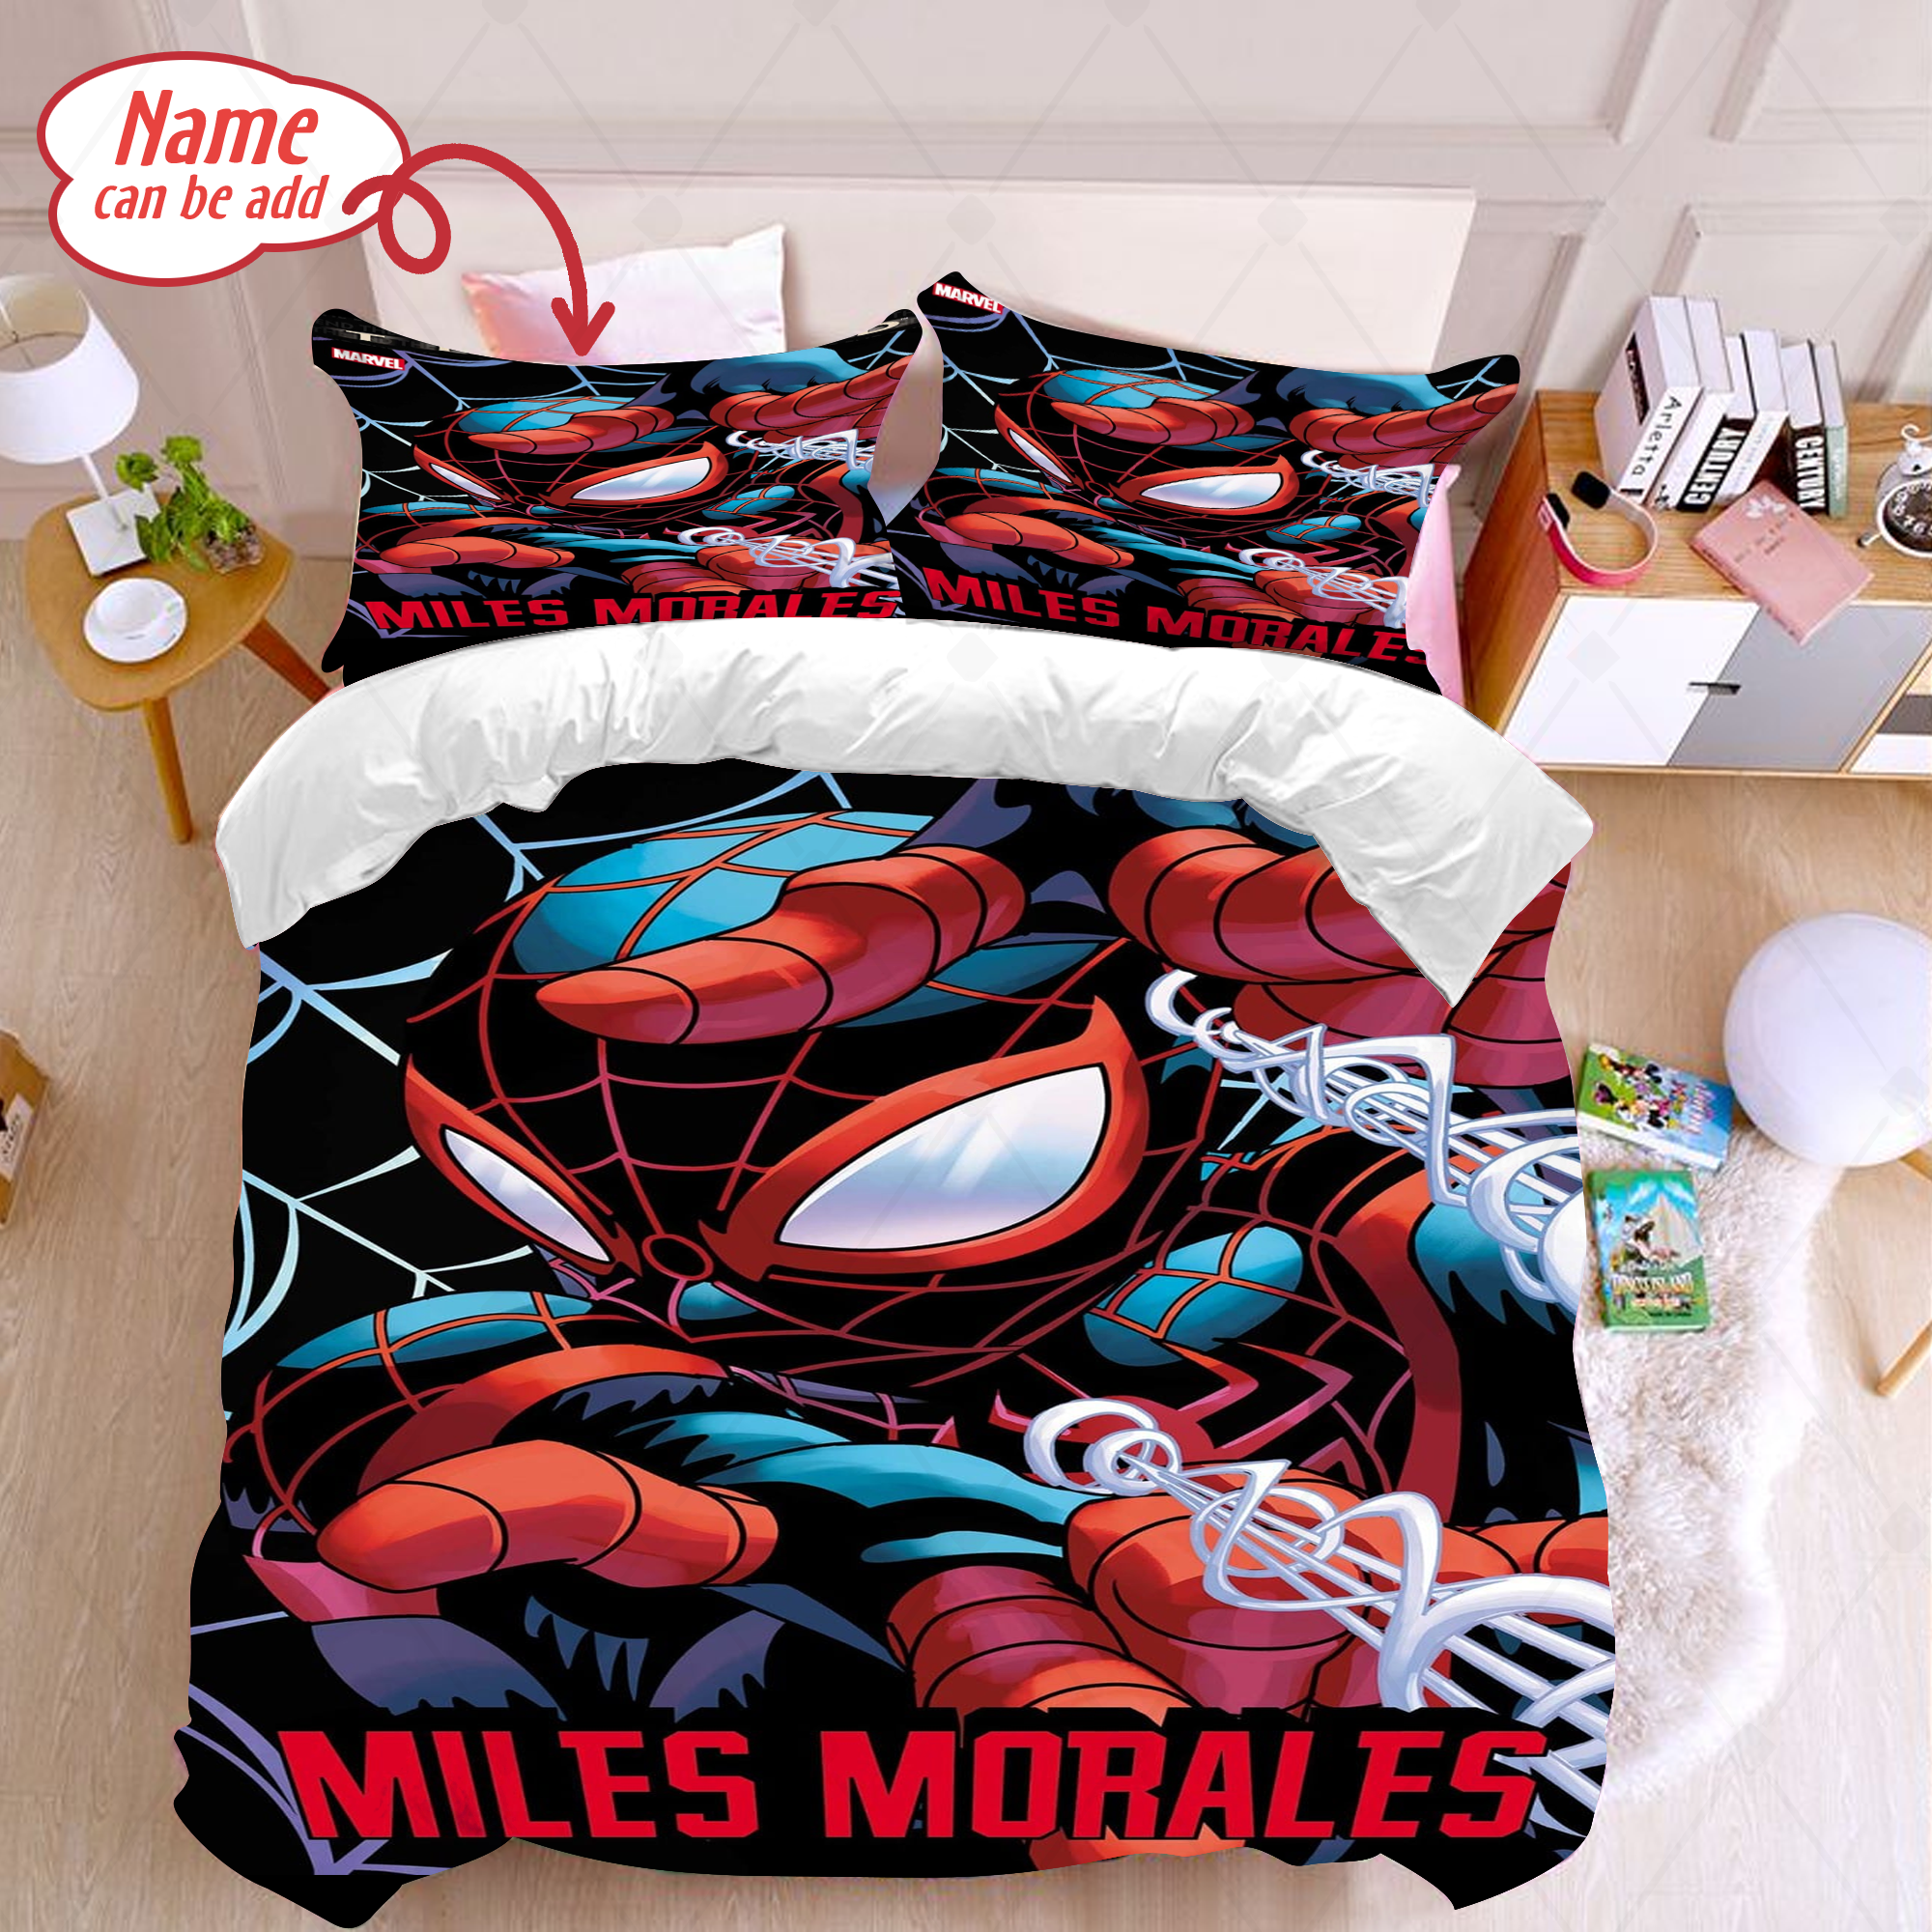 Personalized Miles Morales Bedding Set Miles Morales Duvet Cover And Pillowcase Miles Morales Fan Gifts Miles Morales Blanket